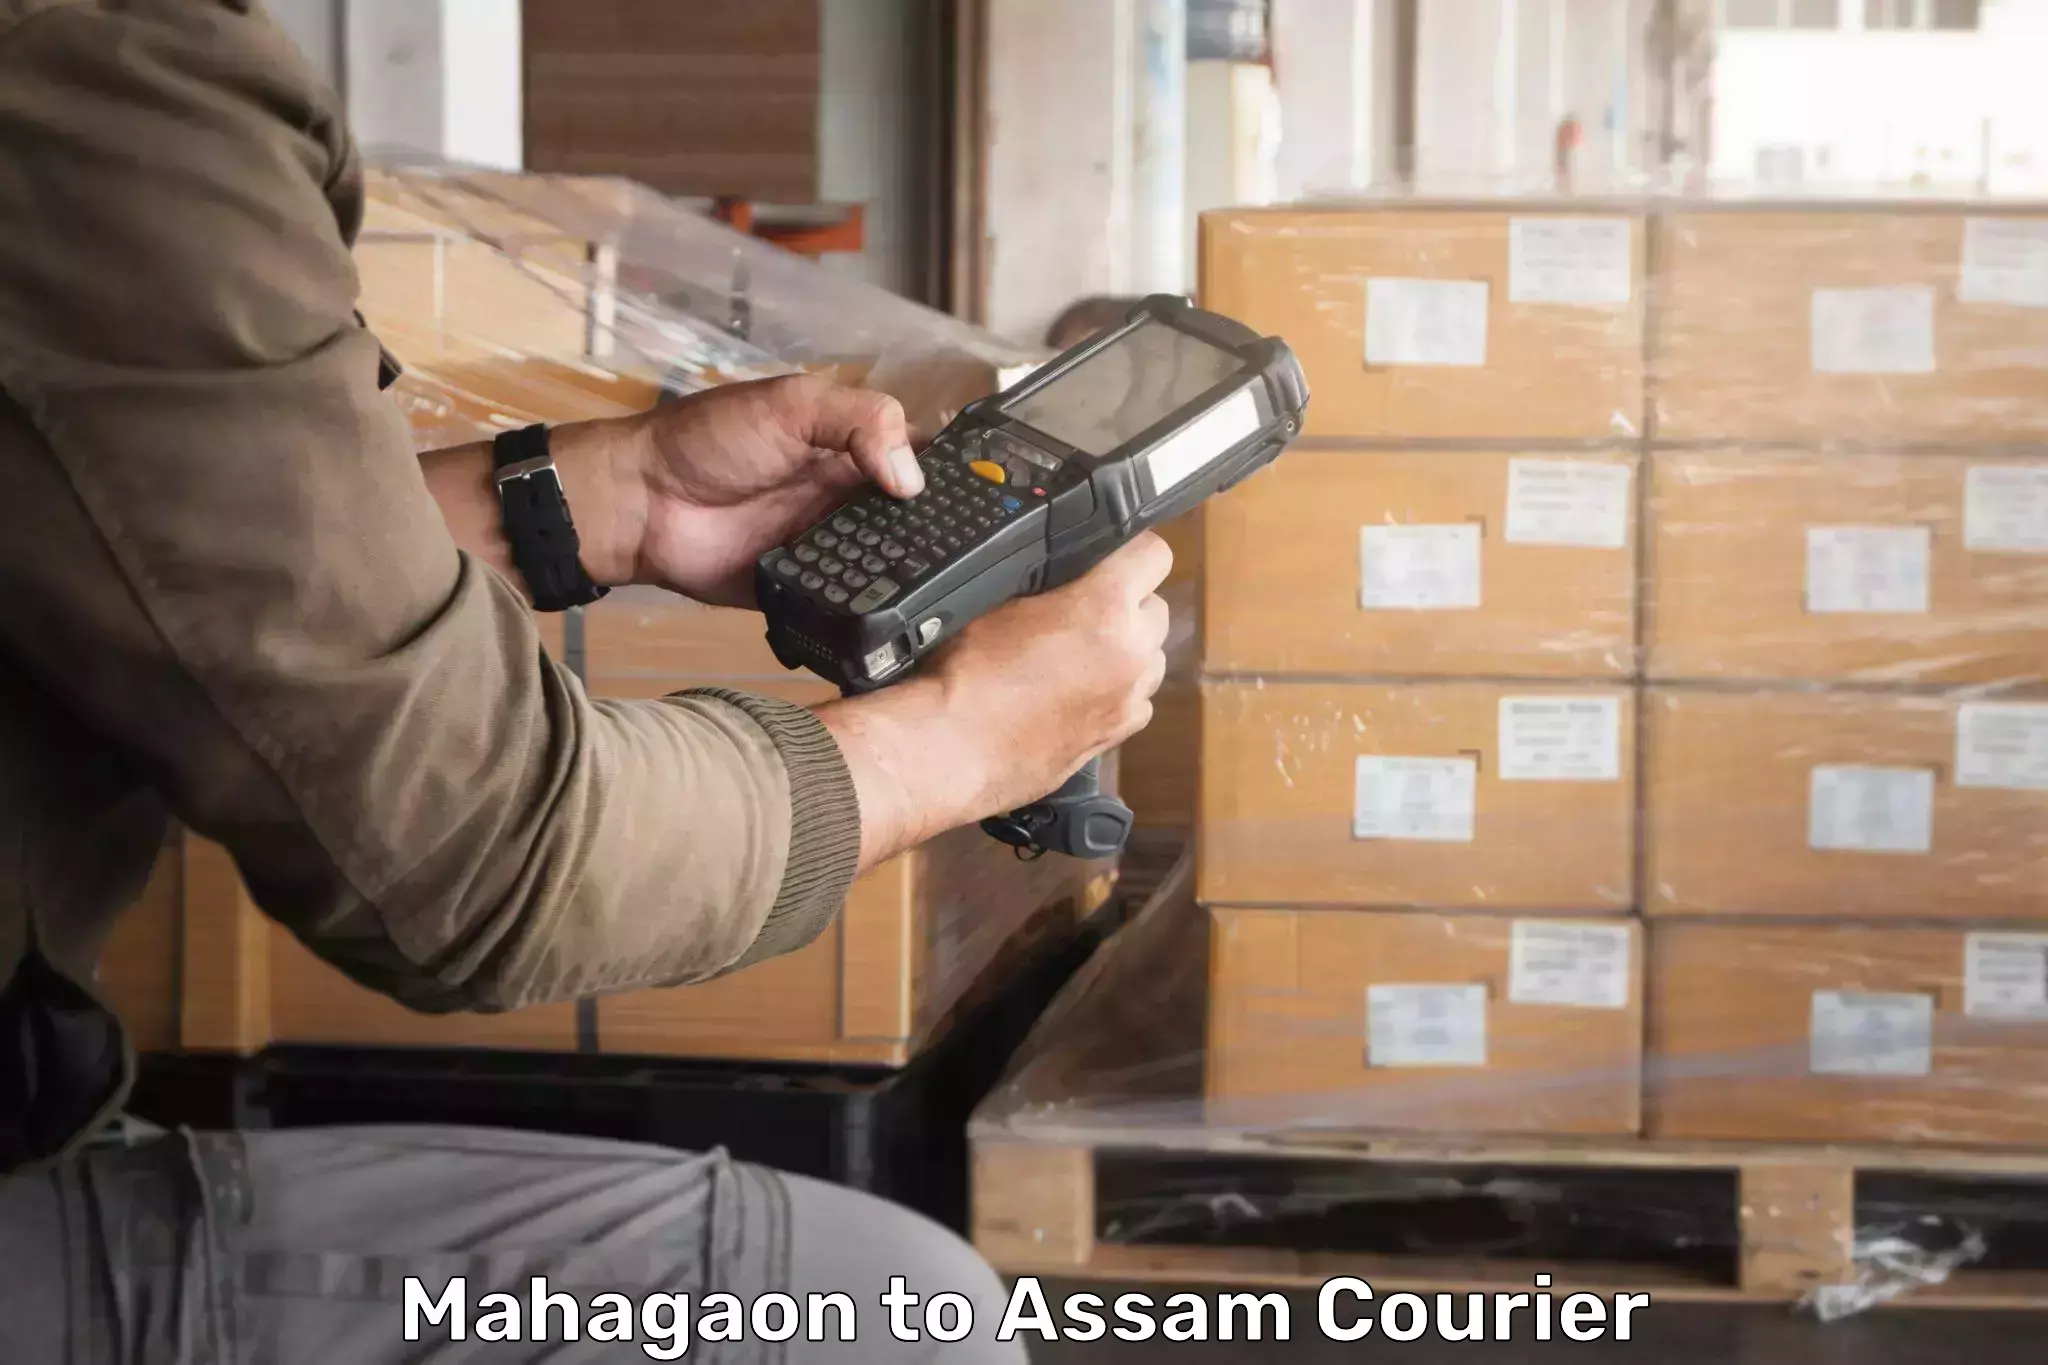 Flexible delivery schedules Mahagaon to Assam